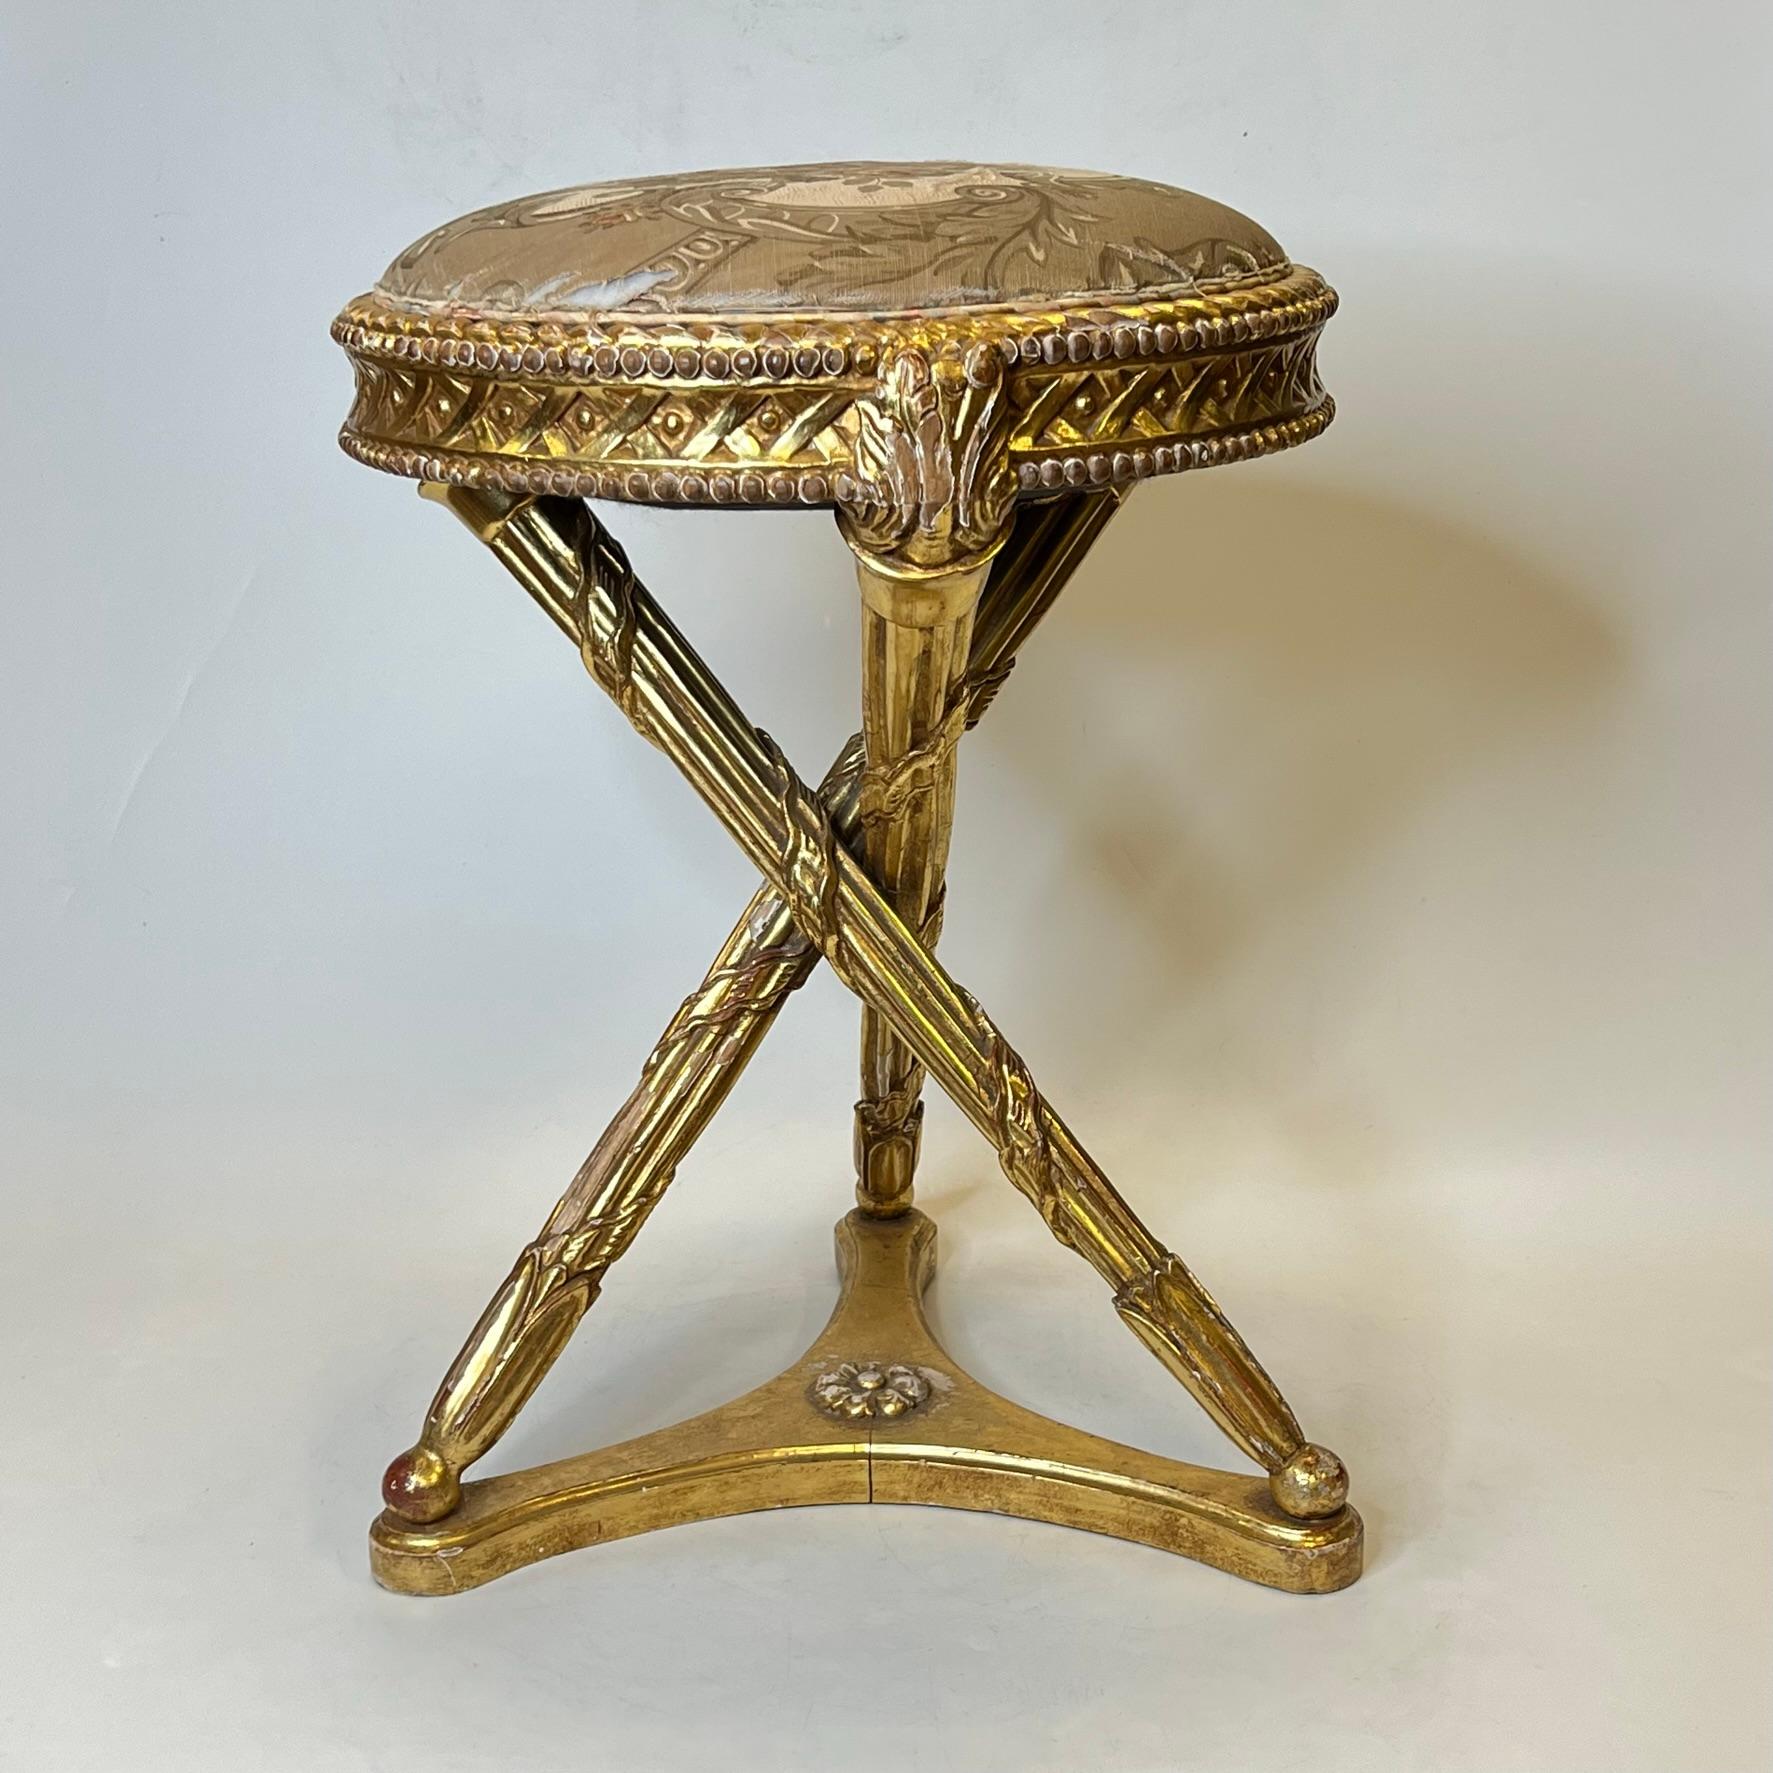  French Turn of the Century Louis XVI Style Giltwood Stool 1